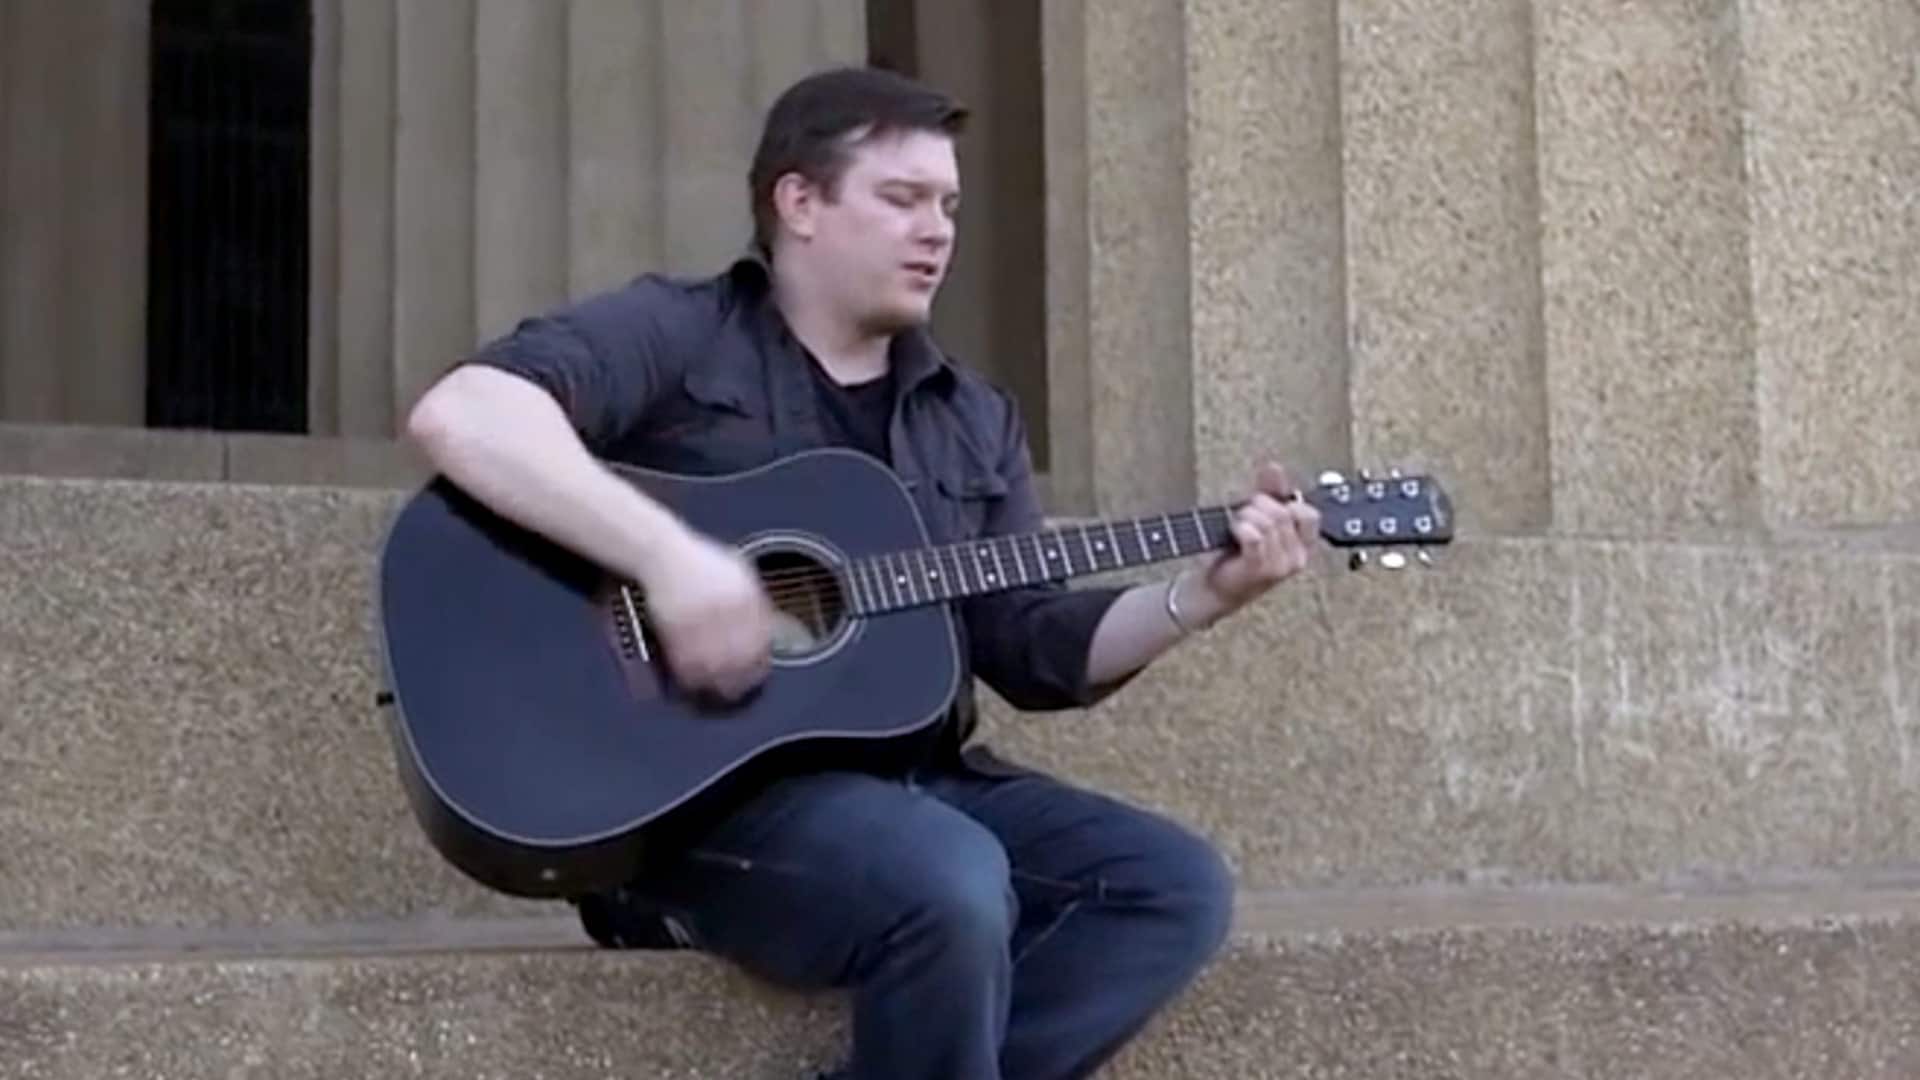 Russ Kettle, who earned his degree from SNHU in 2017, sitting on a set of stone steps playing a black acoustic guitar.